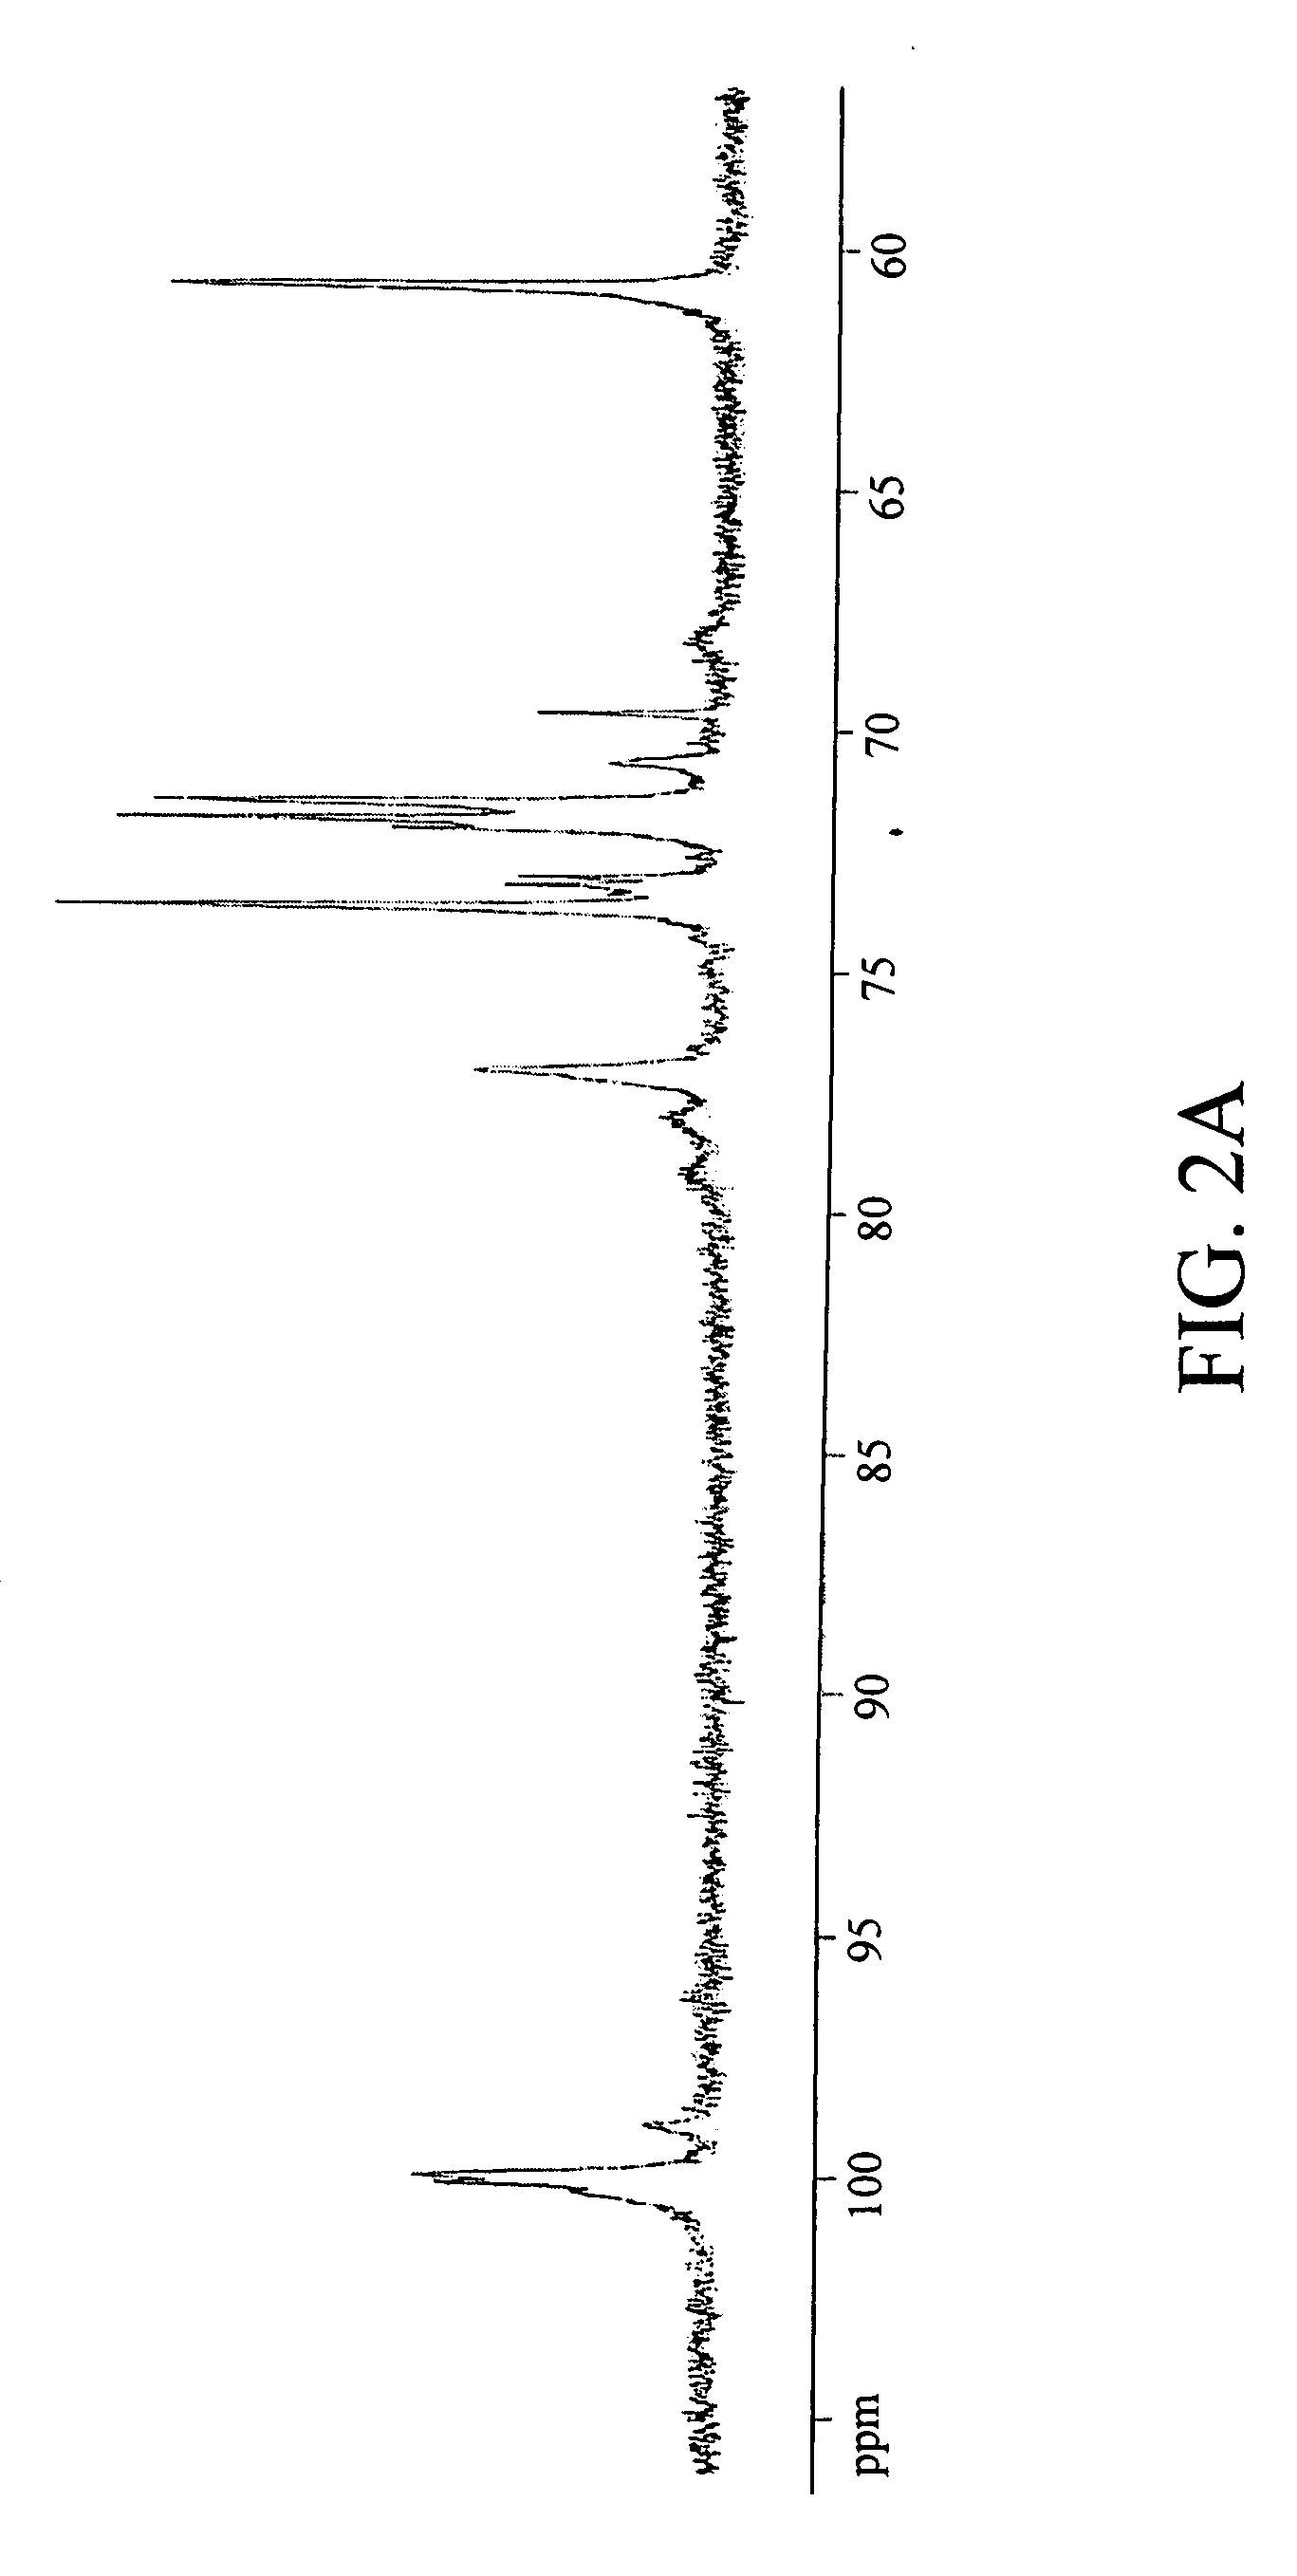 Materials and methods for immune system stimulation